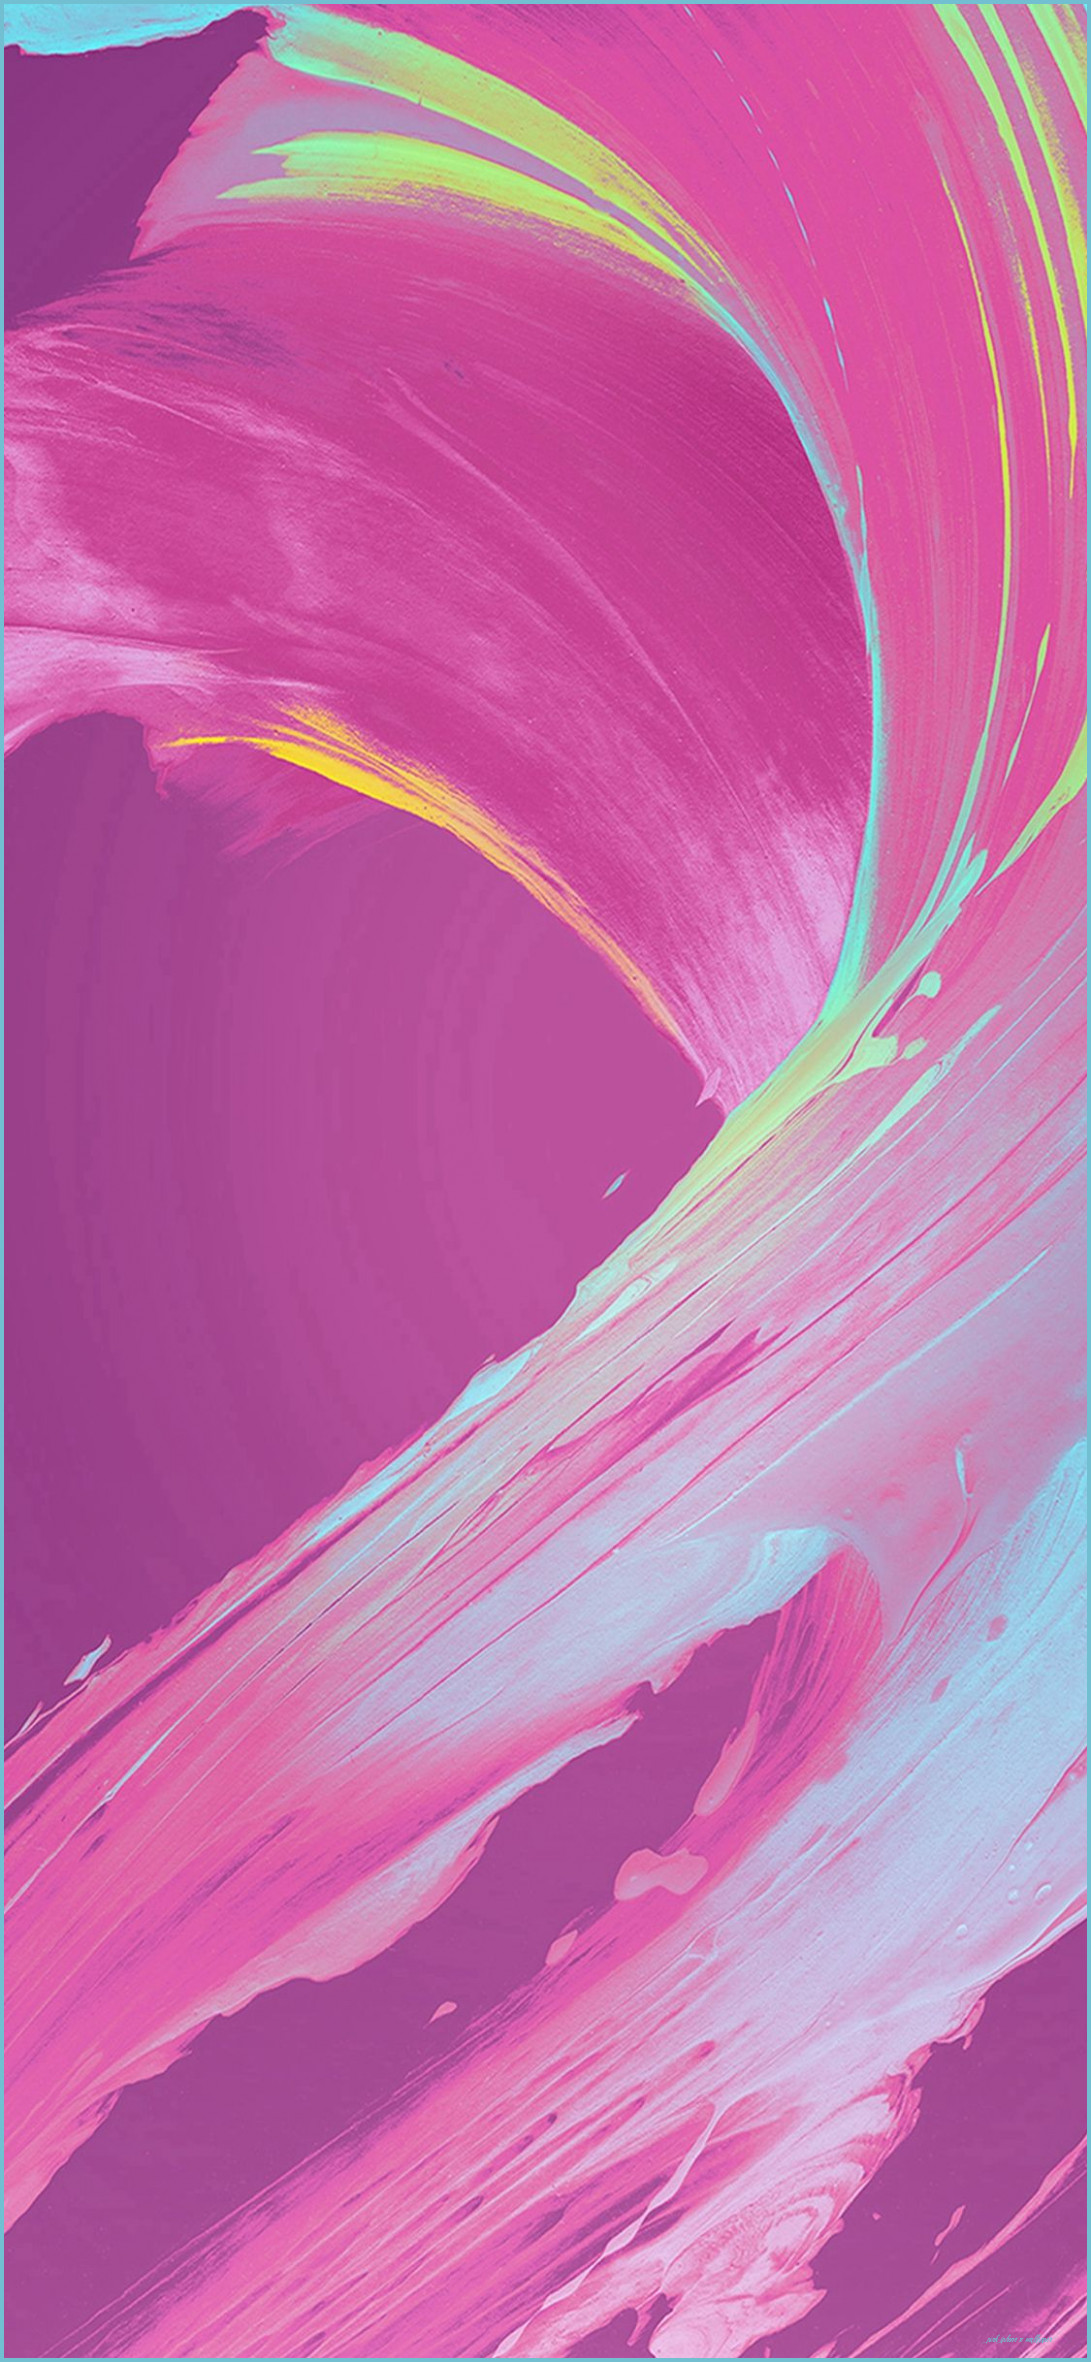 Xperia Background Purple Pink Sky Blue, Lime Green & Yellow iPhone X Wallpaper